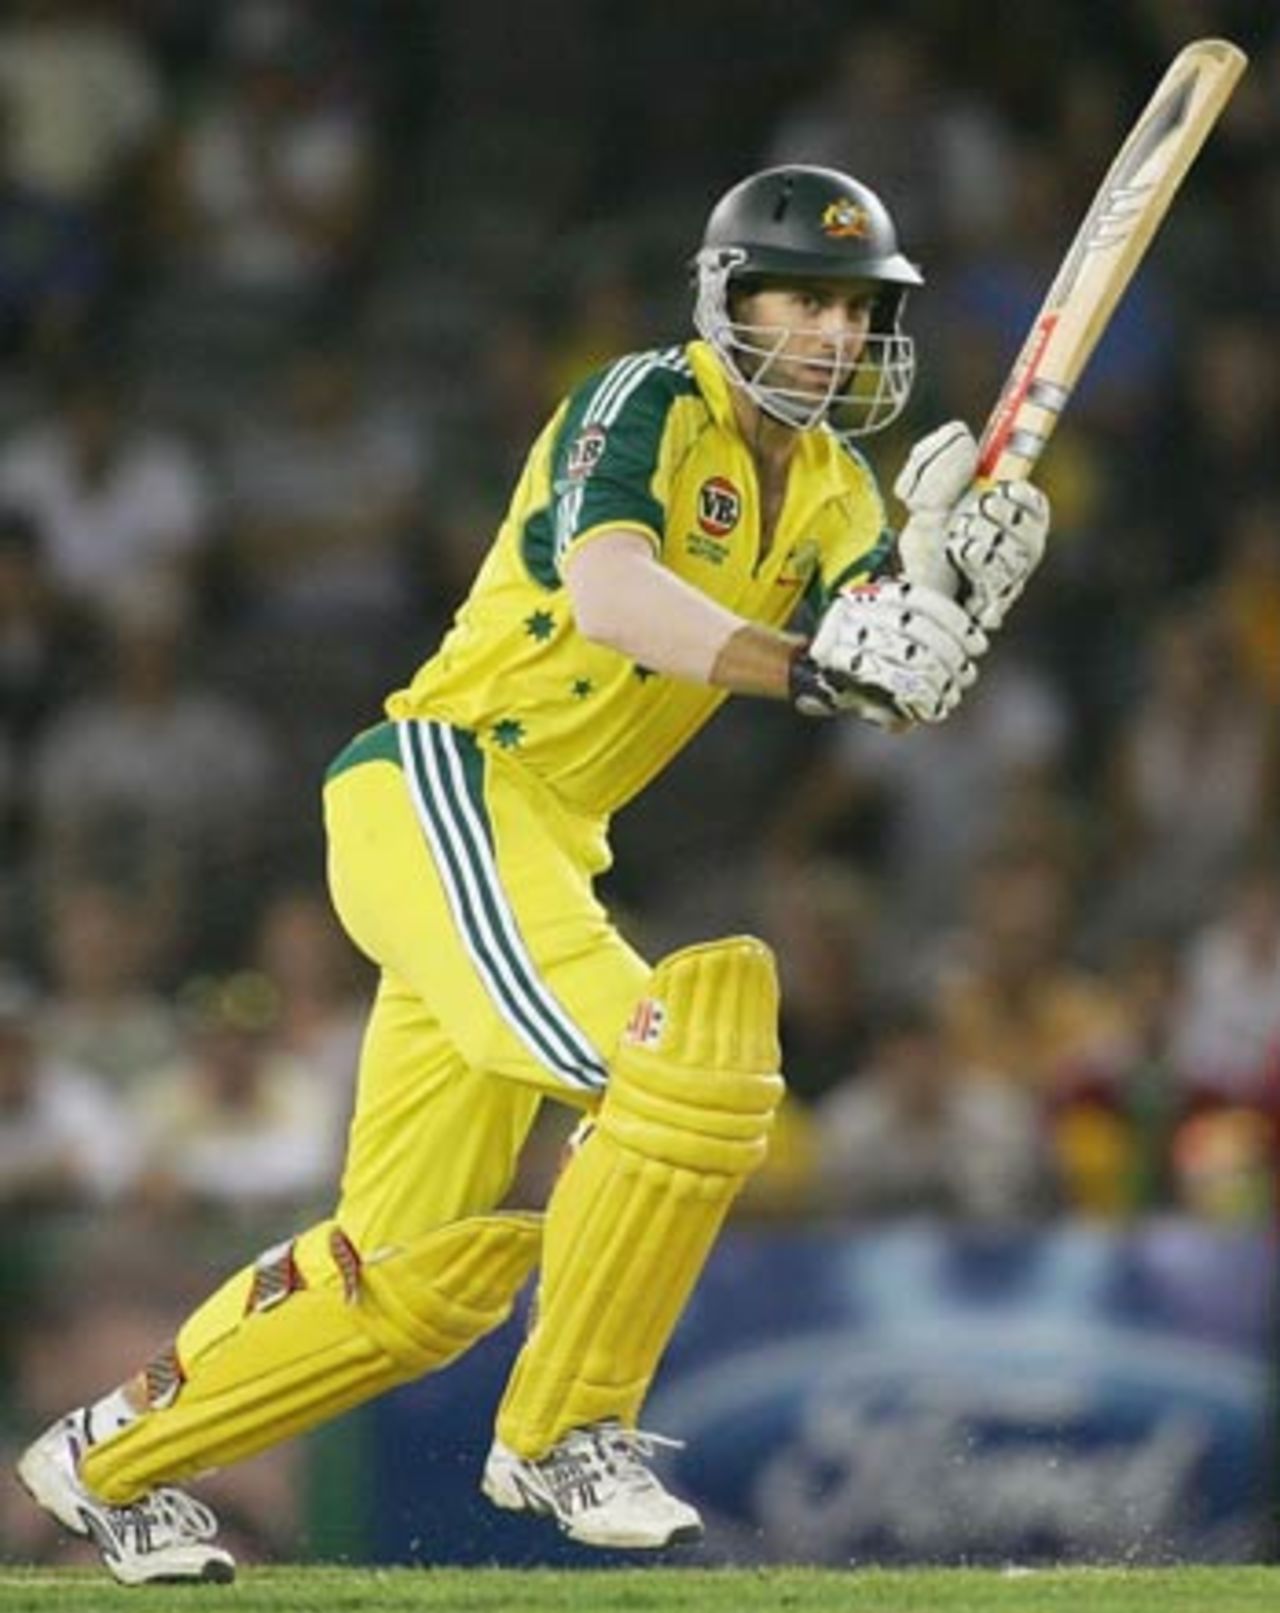 Simon Katich drives on his way to 25, Australia v South Africa, VB Series, Melbourne, February 3, 2006